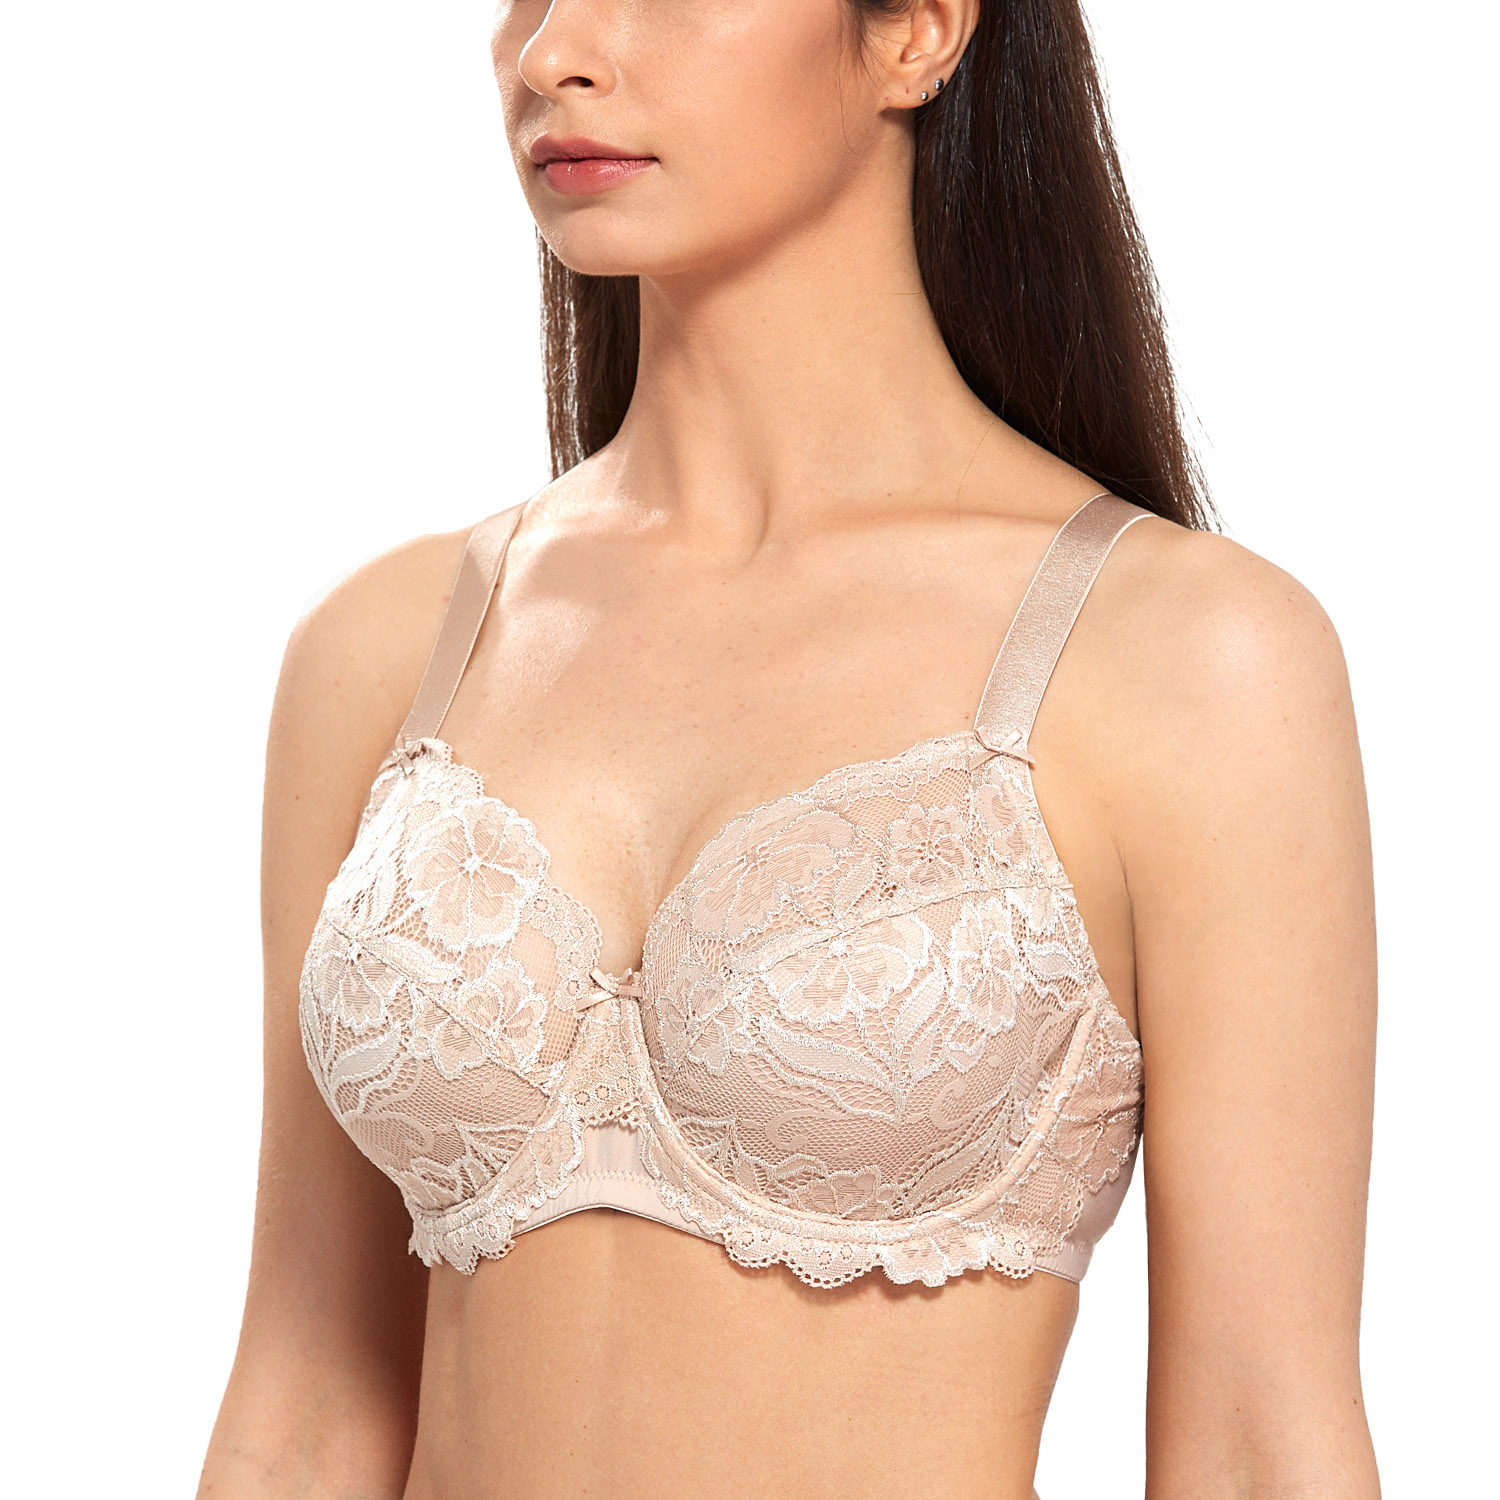 Under-Wired Plus Size Bra Elegant Floral Lace Thin Span Padding Cup C/D 36-44  Skin-friendly Soft Breathable Material